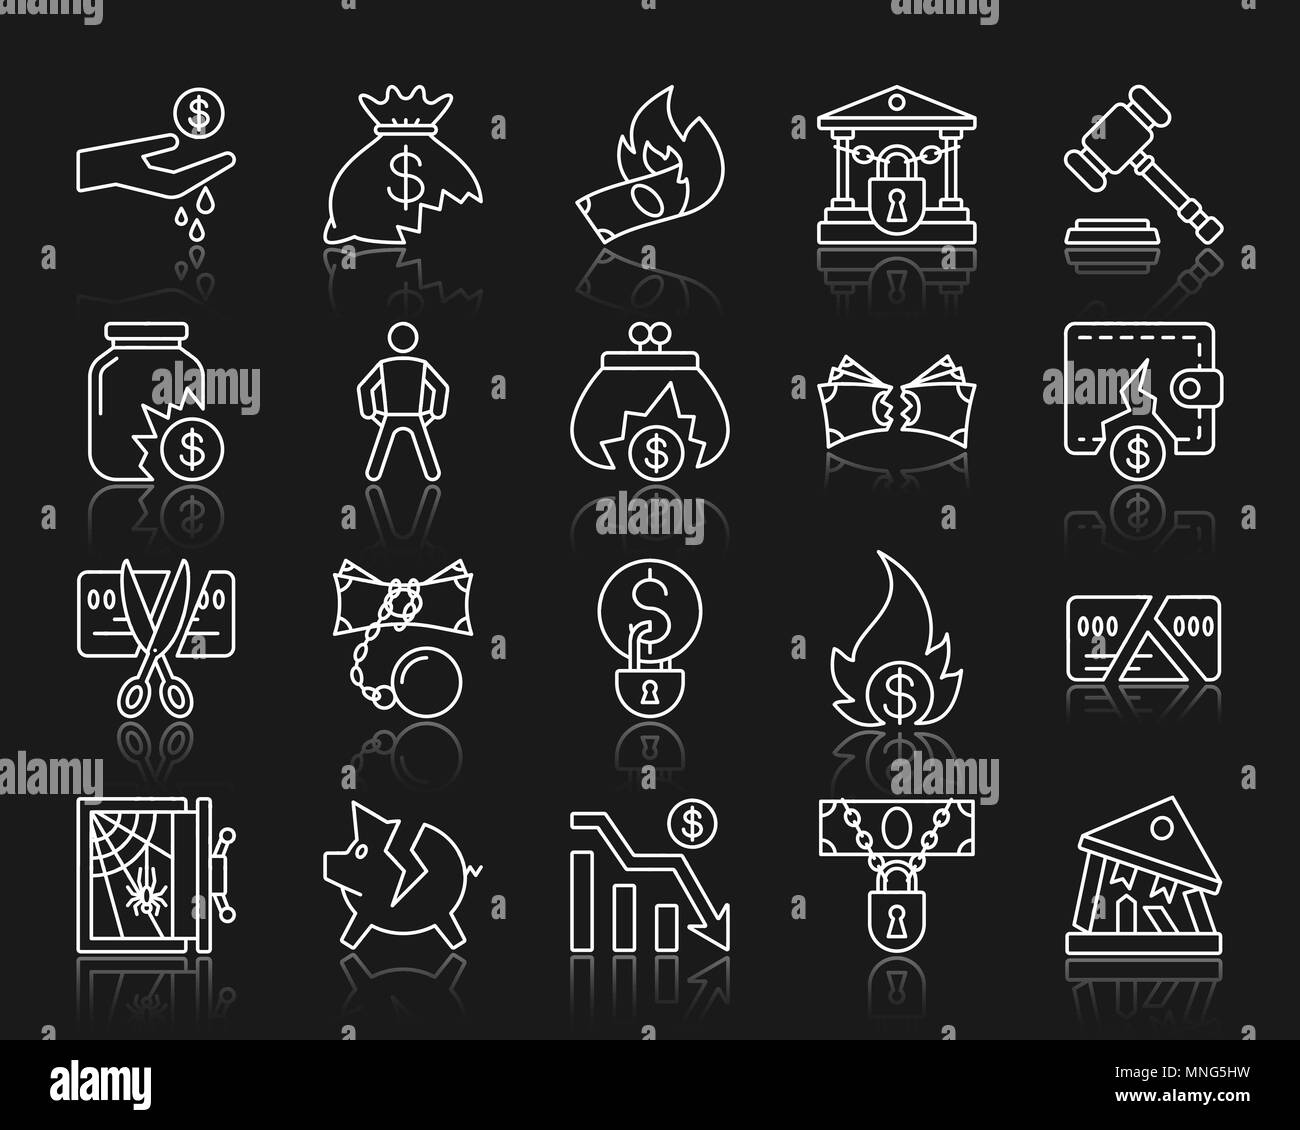 Bankruptcy thin line icons set. Outline web sign kit of business. Crisis line icon collection includes poverty, decline, graph. Simple bankruptcy symb Stock Vector